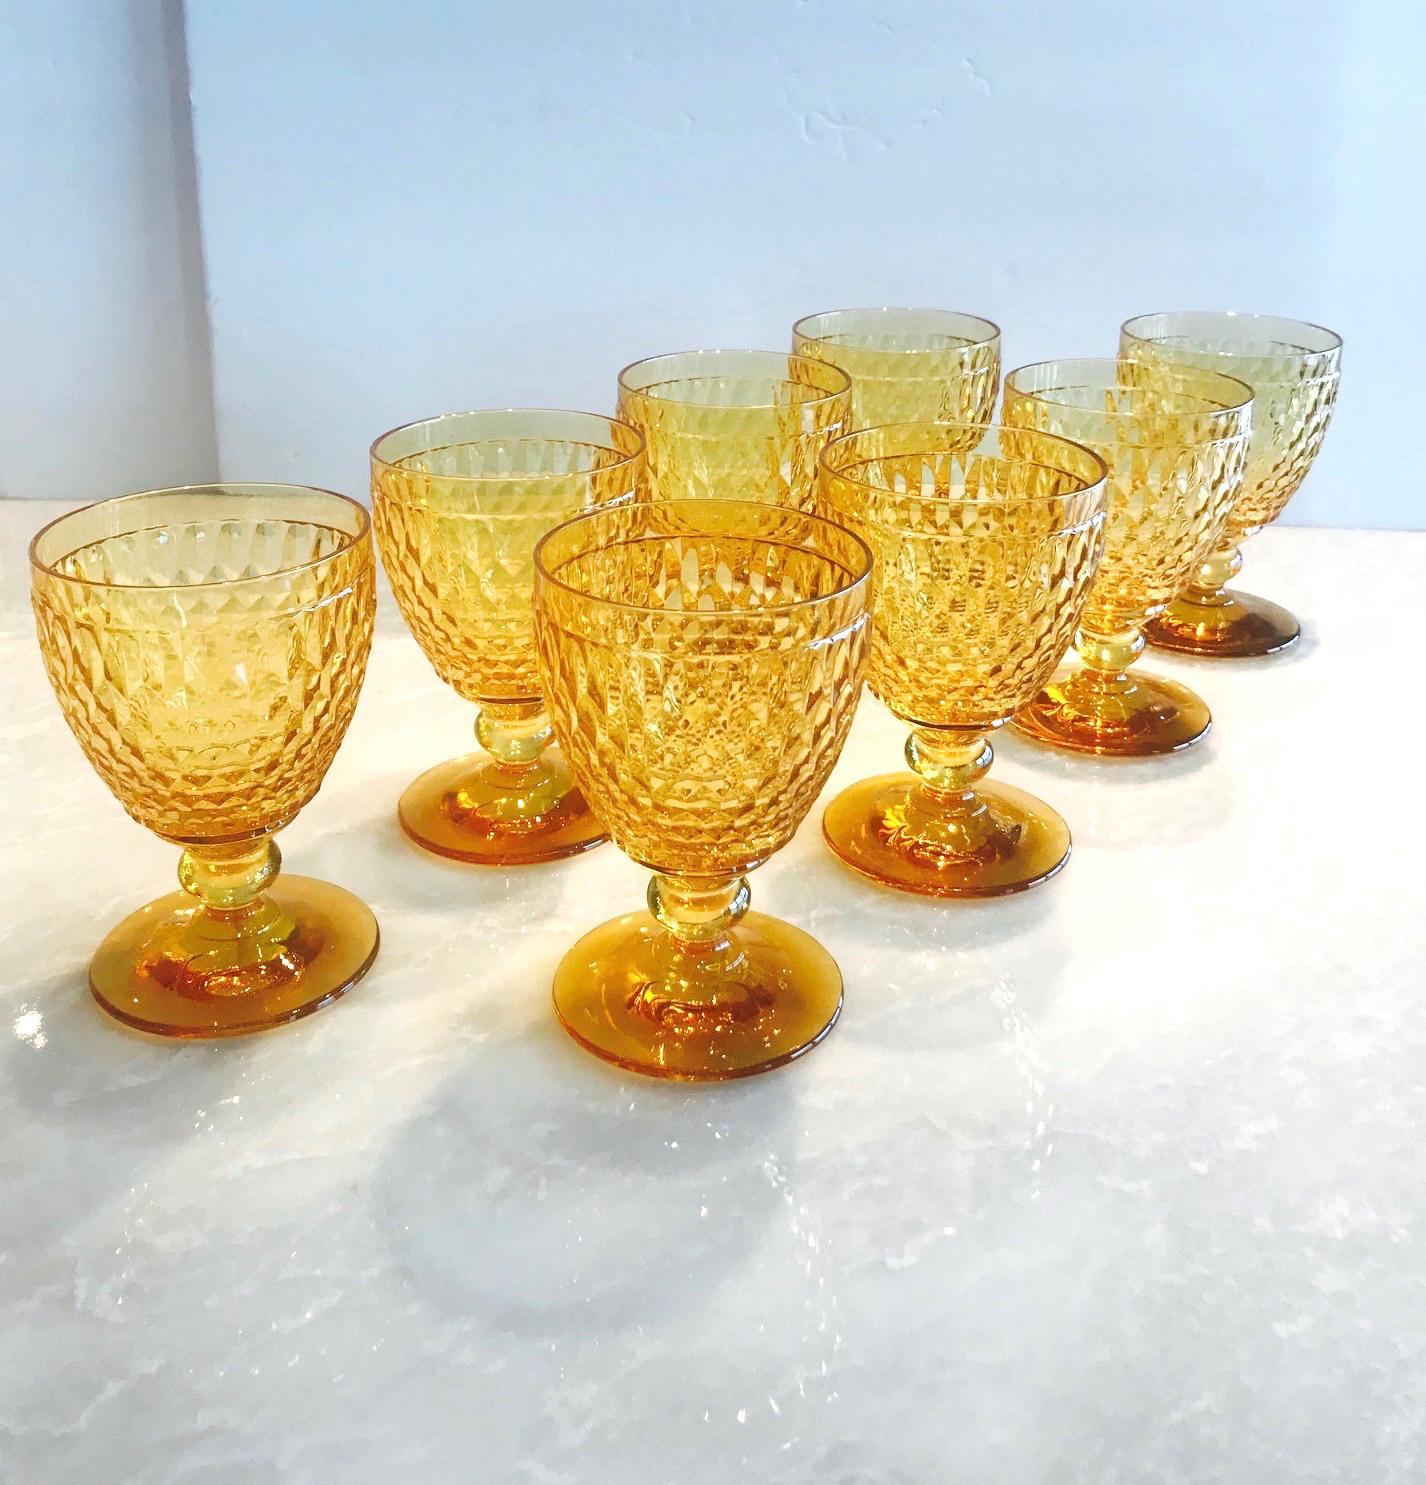 Set of eight luxury crystal goblets from Villeroy & Boch's Boston series. The stemware glasses are comprised of hobnail crystal with classic diamond patterns and deliberate short stems. In gorgeous amber colored crystal, making them a unique and